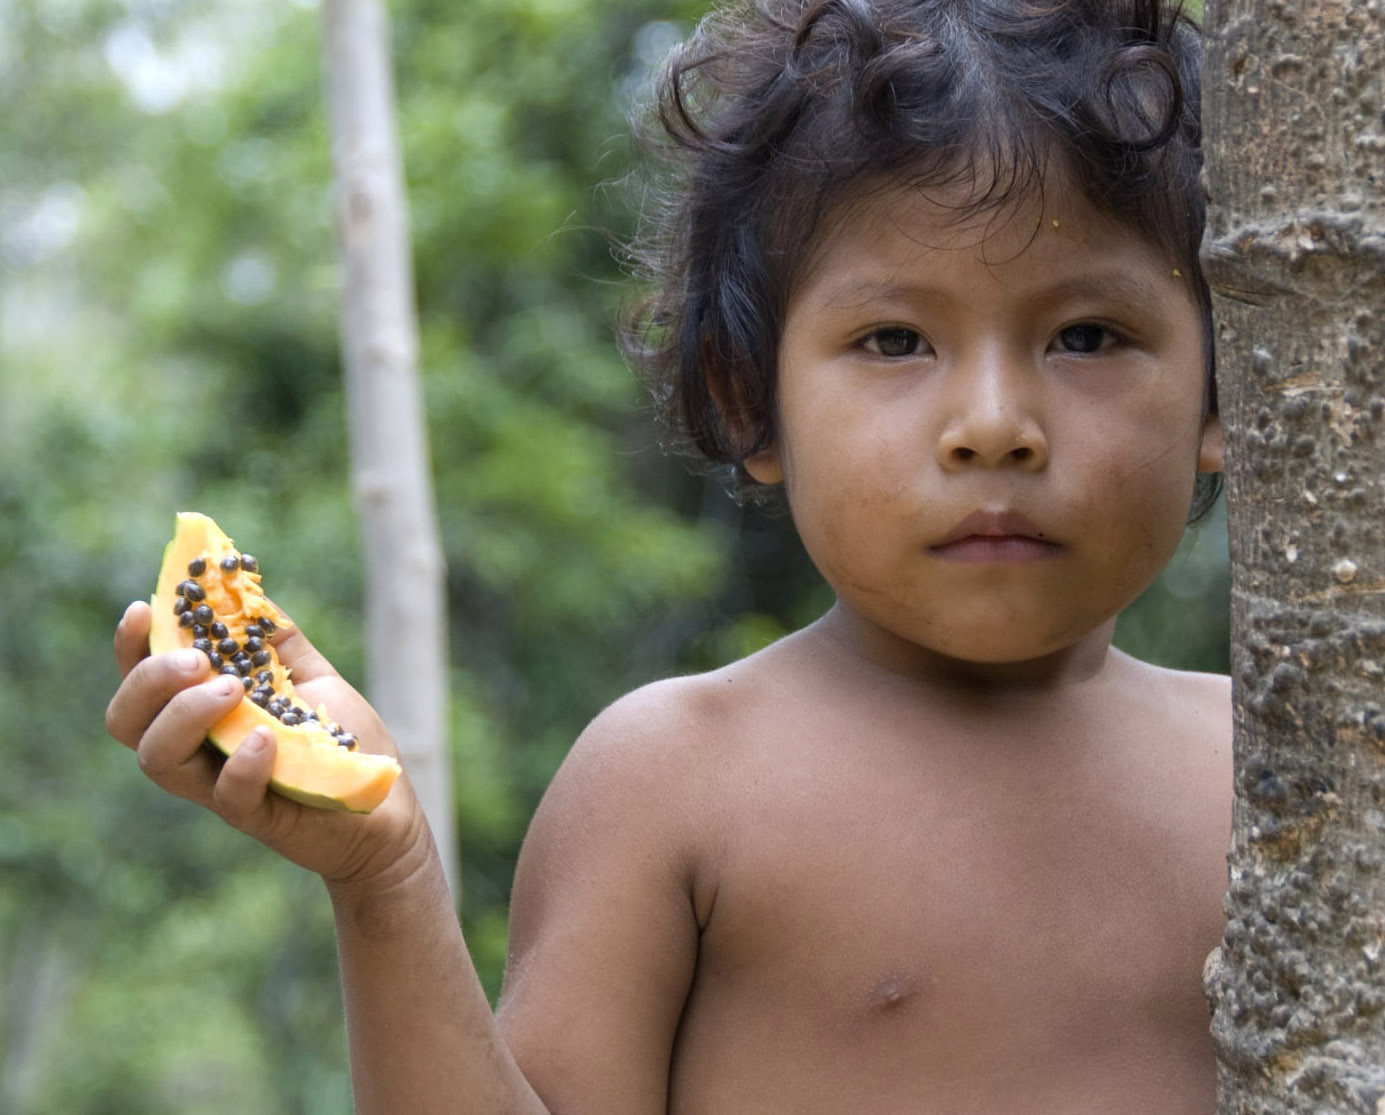 Brazil S Army Moves To Protect Indigenous Awá Tribe By Halting Illegal Logging Photos Huffpost